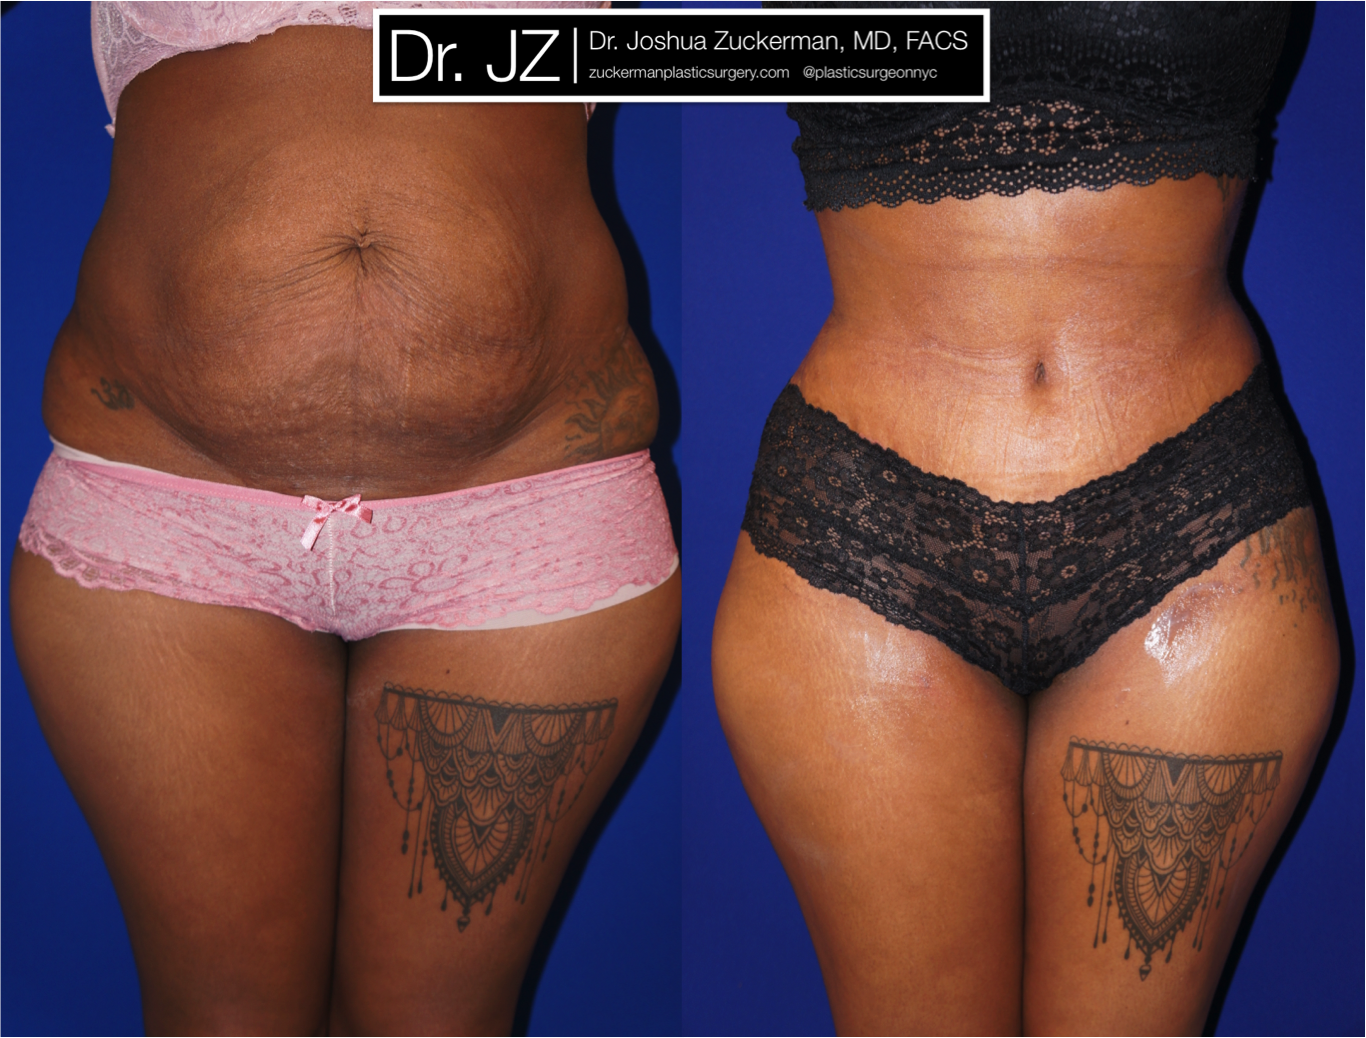 Frontal view of Abdominoplasty patient, female, 1 month post-op. Liposuction of the abdomen and flanks performed as well.